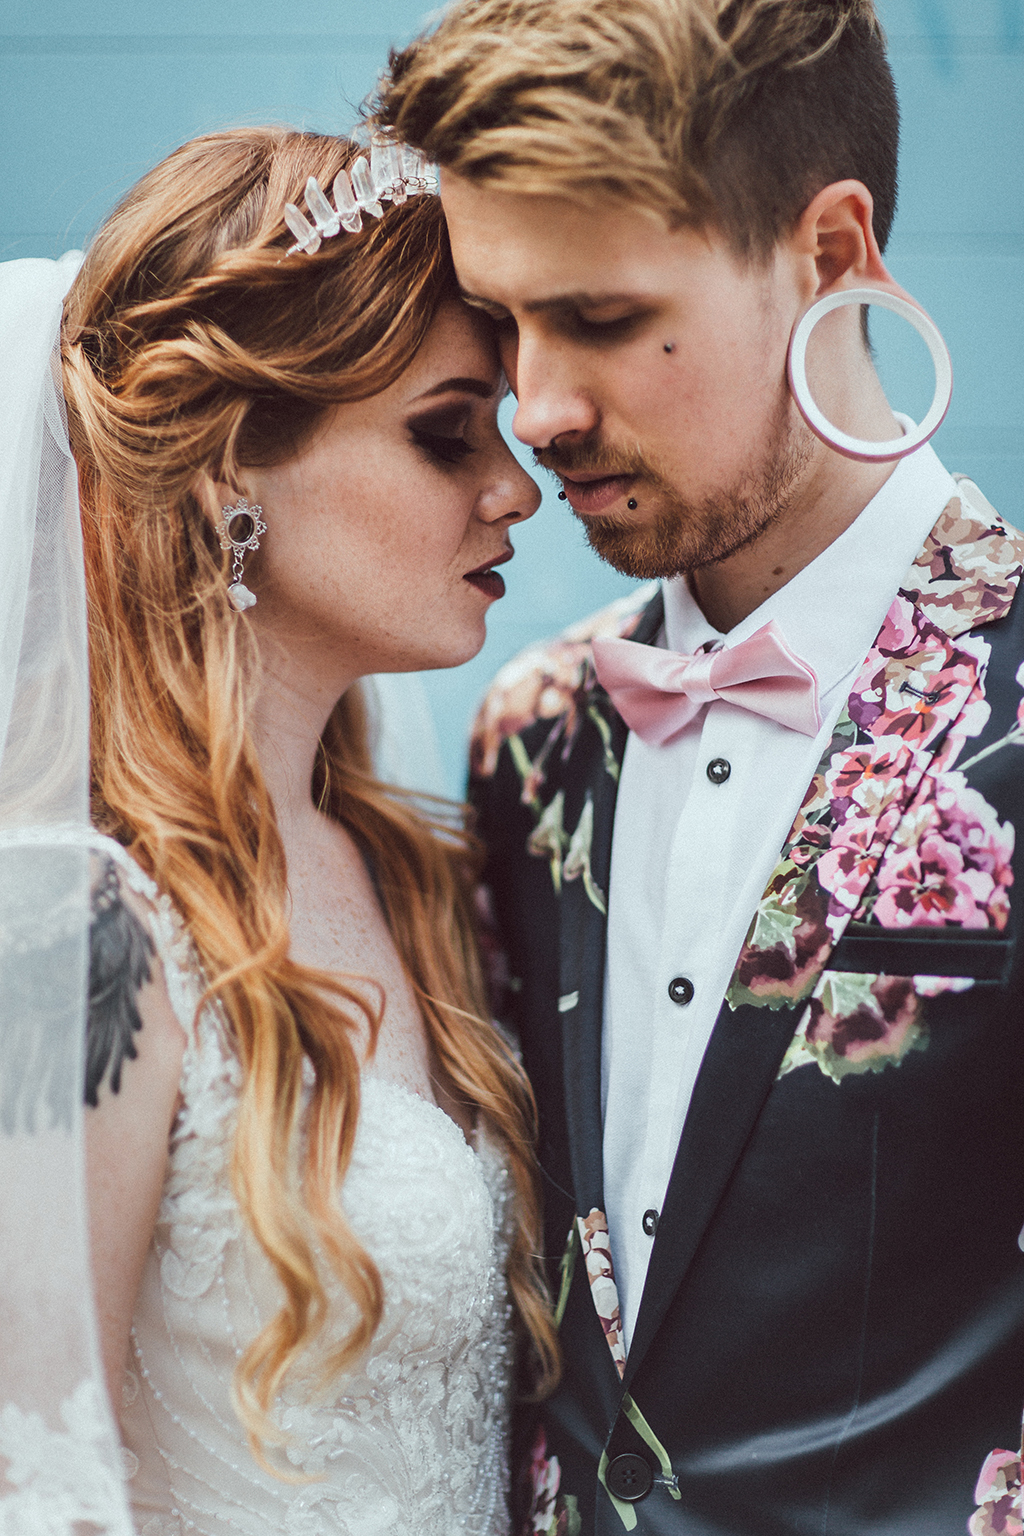 This beautiful couple are two models that decided to tie the knot getting inspired by village fetes, woodlands and all things vegan